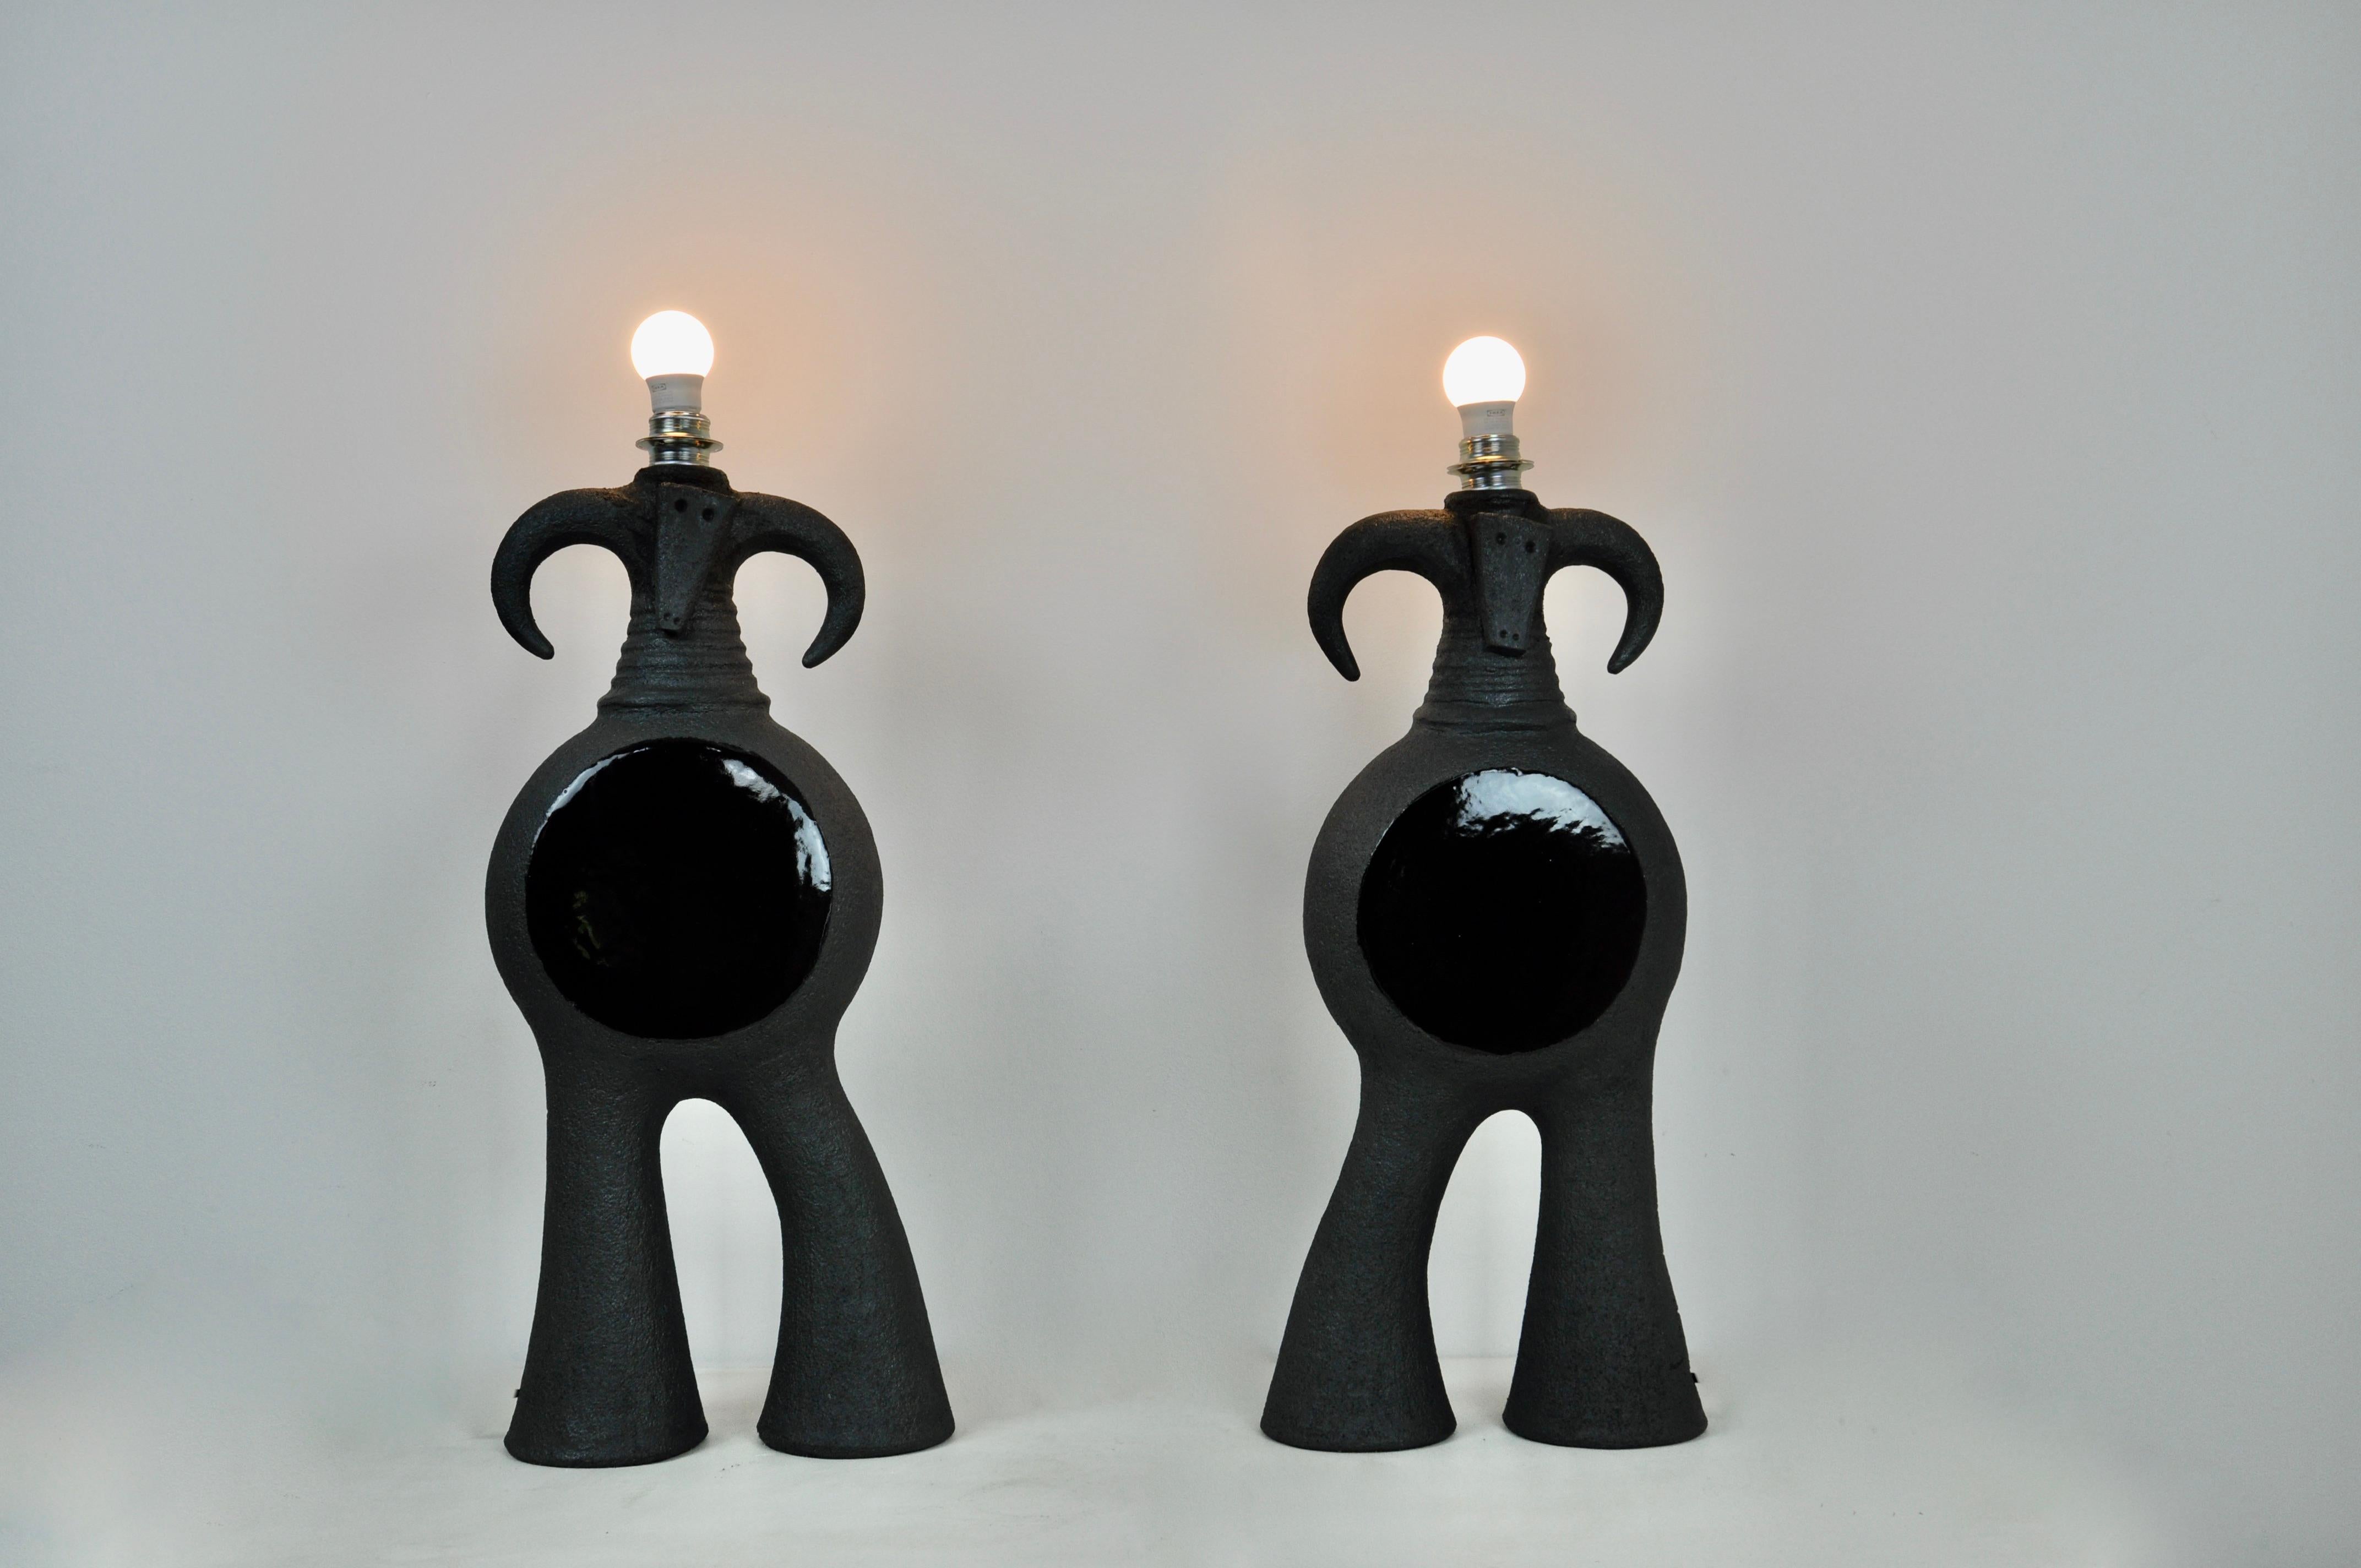 Pair of lamps in the shape of a goat. Stamped Dominique Pouchain.